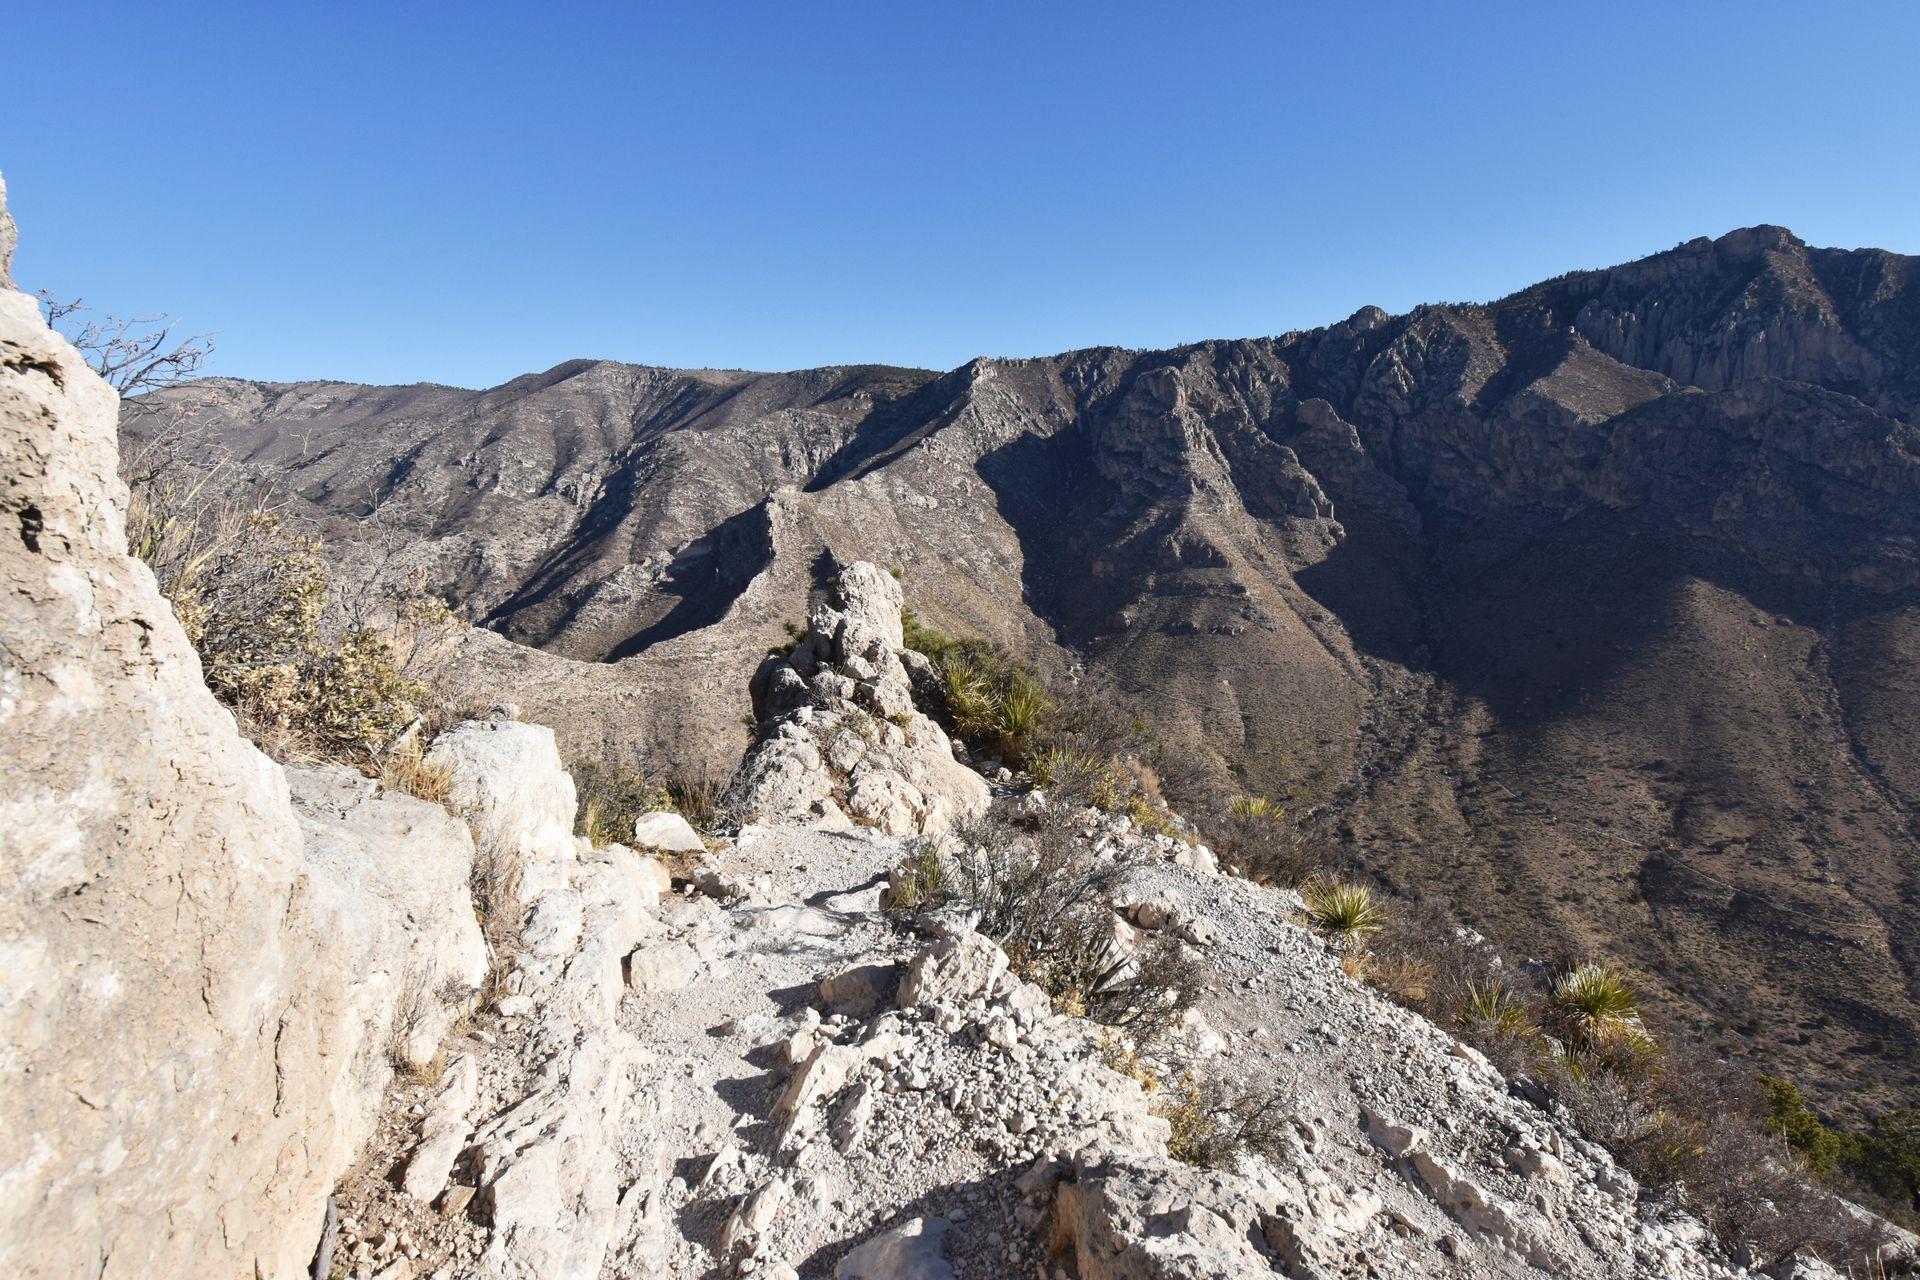 The corner of a switchback on the Guadalupe Peak trail with a mountain view across a valley.